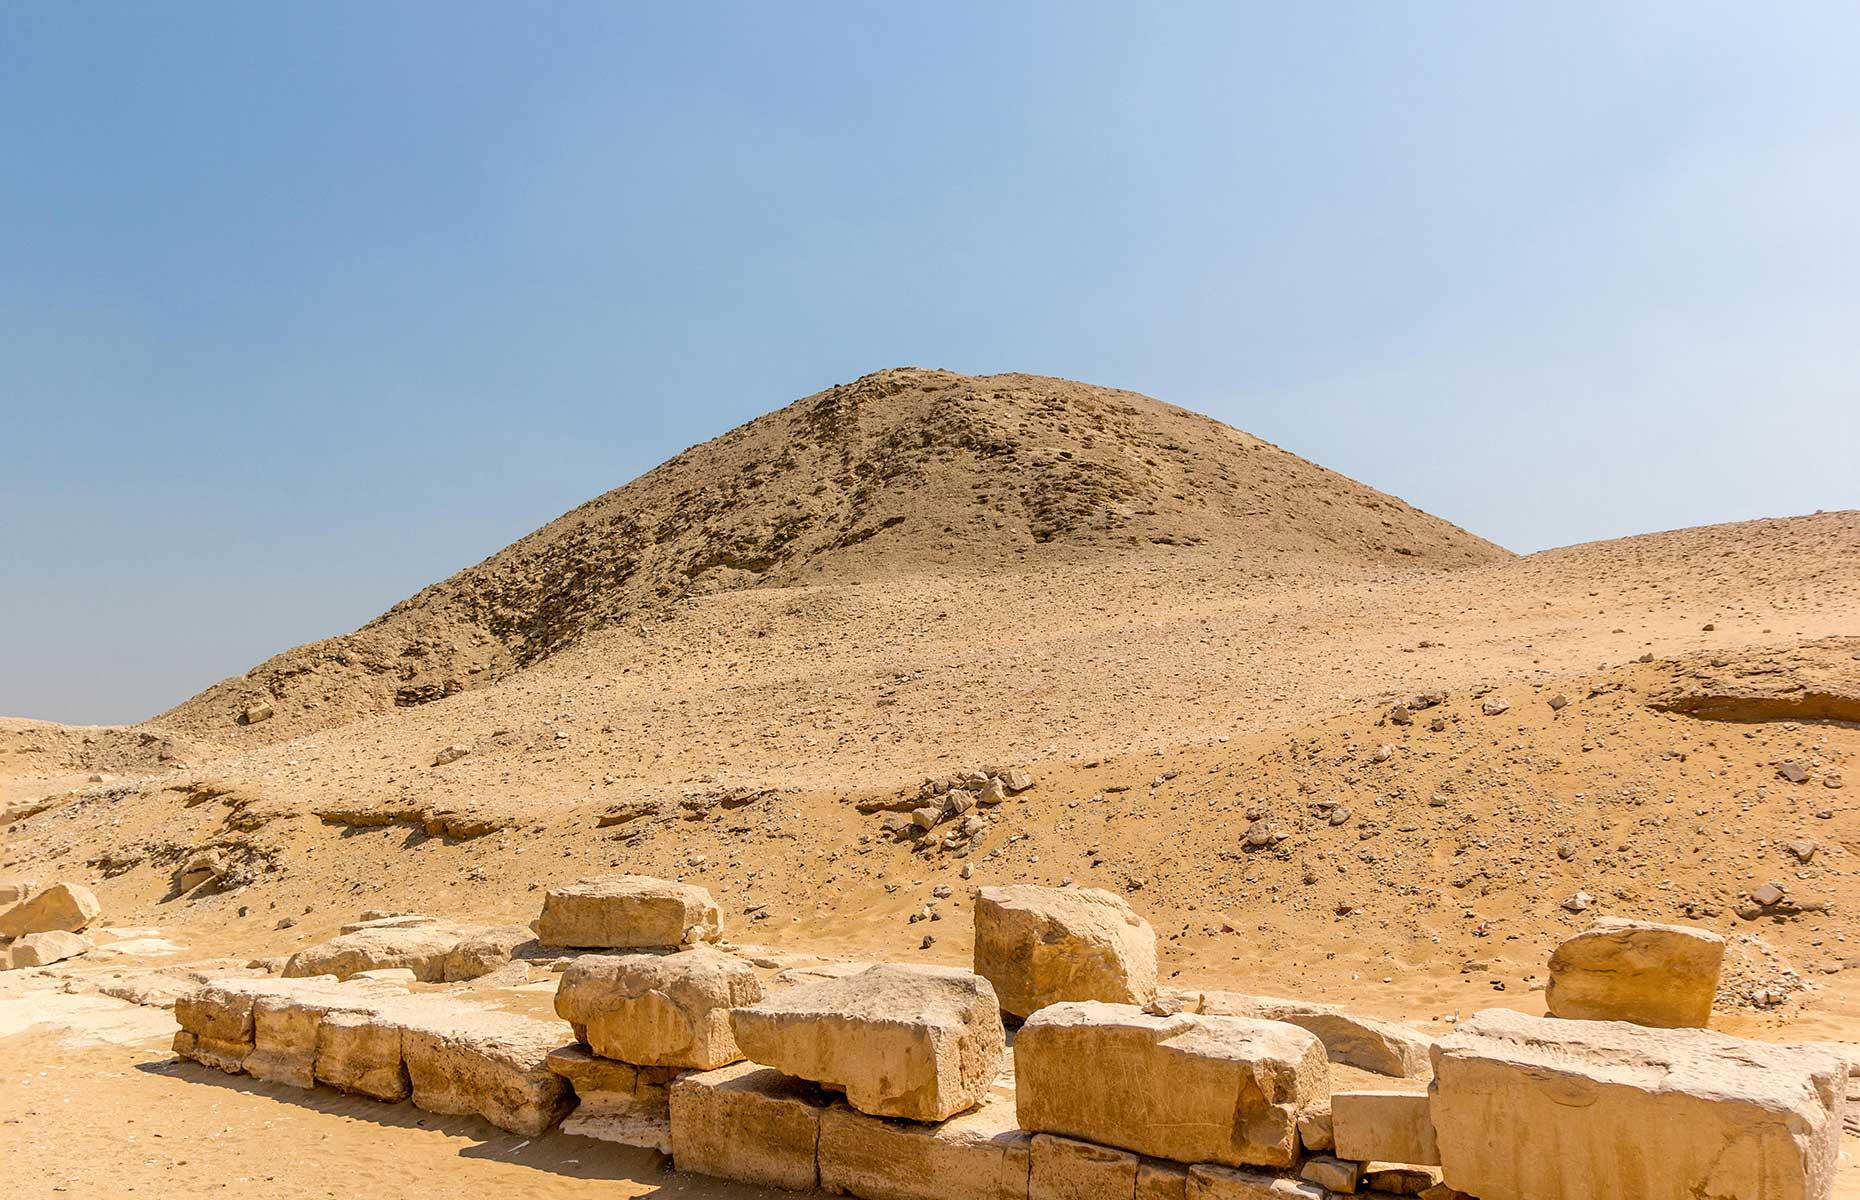 <p>The Teti Pyramid was once 172 feet (52.5m) tall and housed the deceased King Teti, the first pharaoh of the 6th dynasty (roughly 2345-2323 BC, although sources vary). Located in Saqqara, the pyramid was constructed with a core of stone blocks encased in limestone. Inside were typical painted reliefs depicting offerings to the gods, plus star-patterned ceilings and three niches which may have held statues of the king. Today the site looks more like a lopsided mound, but it hasn't completely collapsed and you can still take a tour inside.</p>